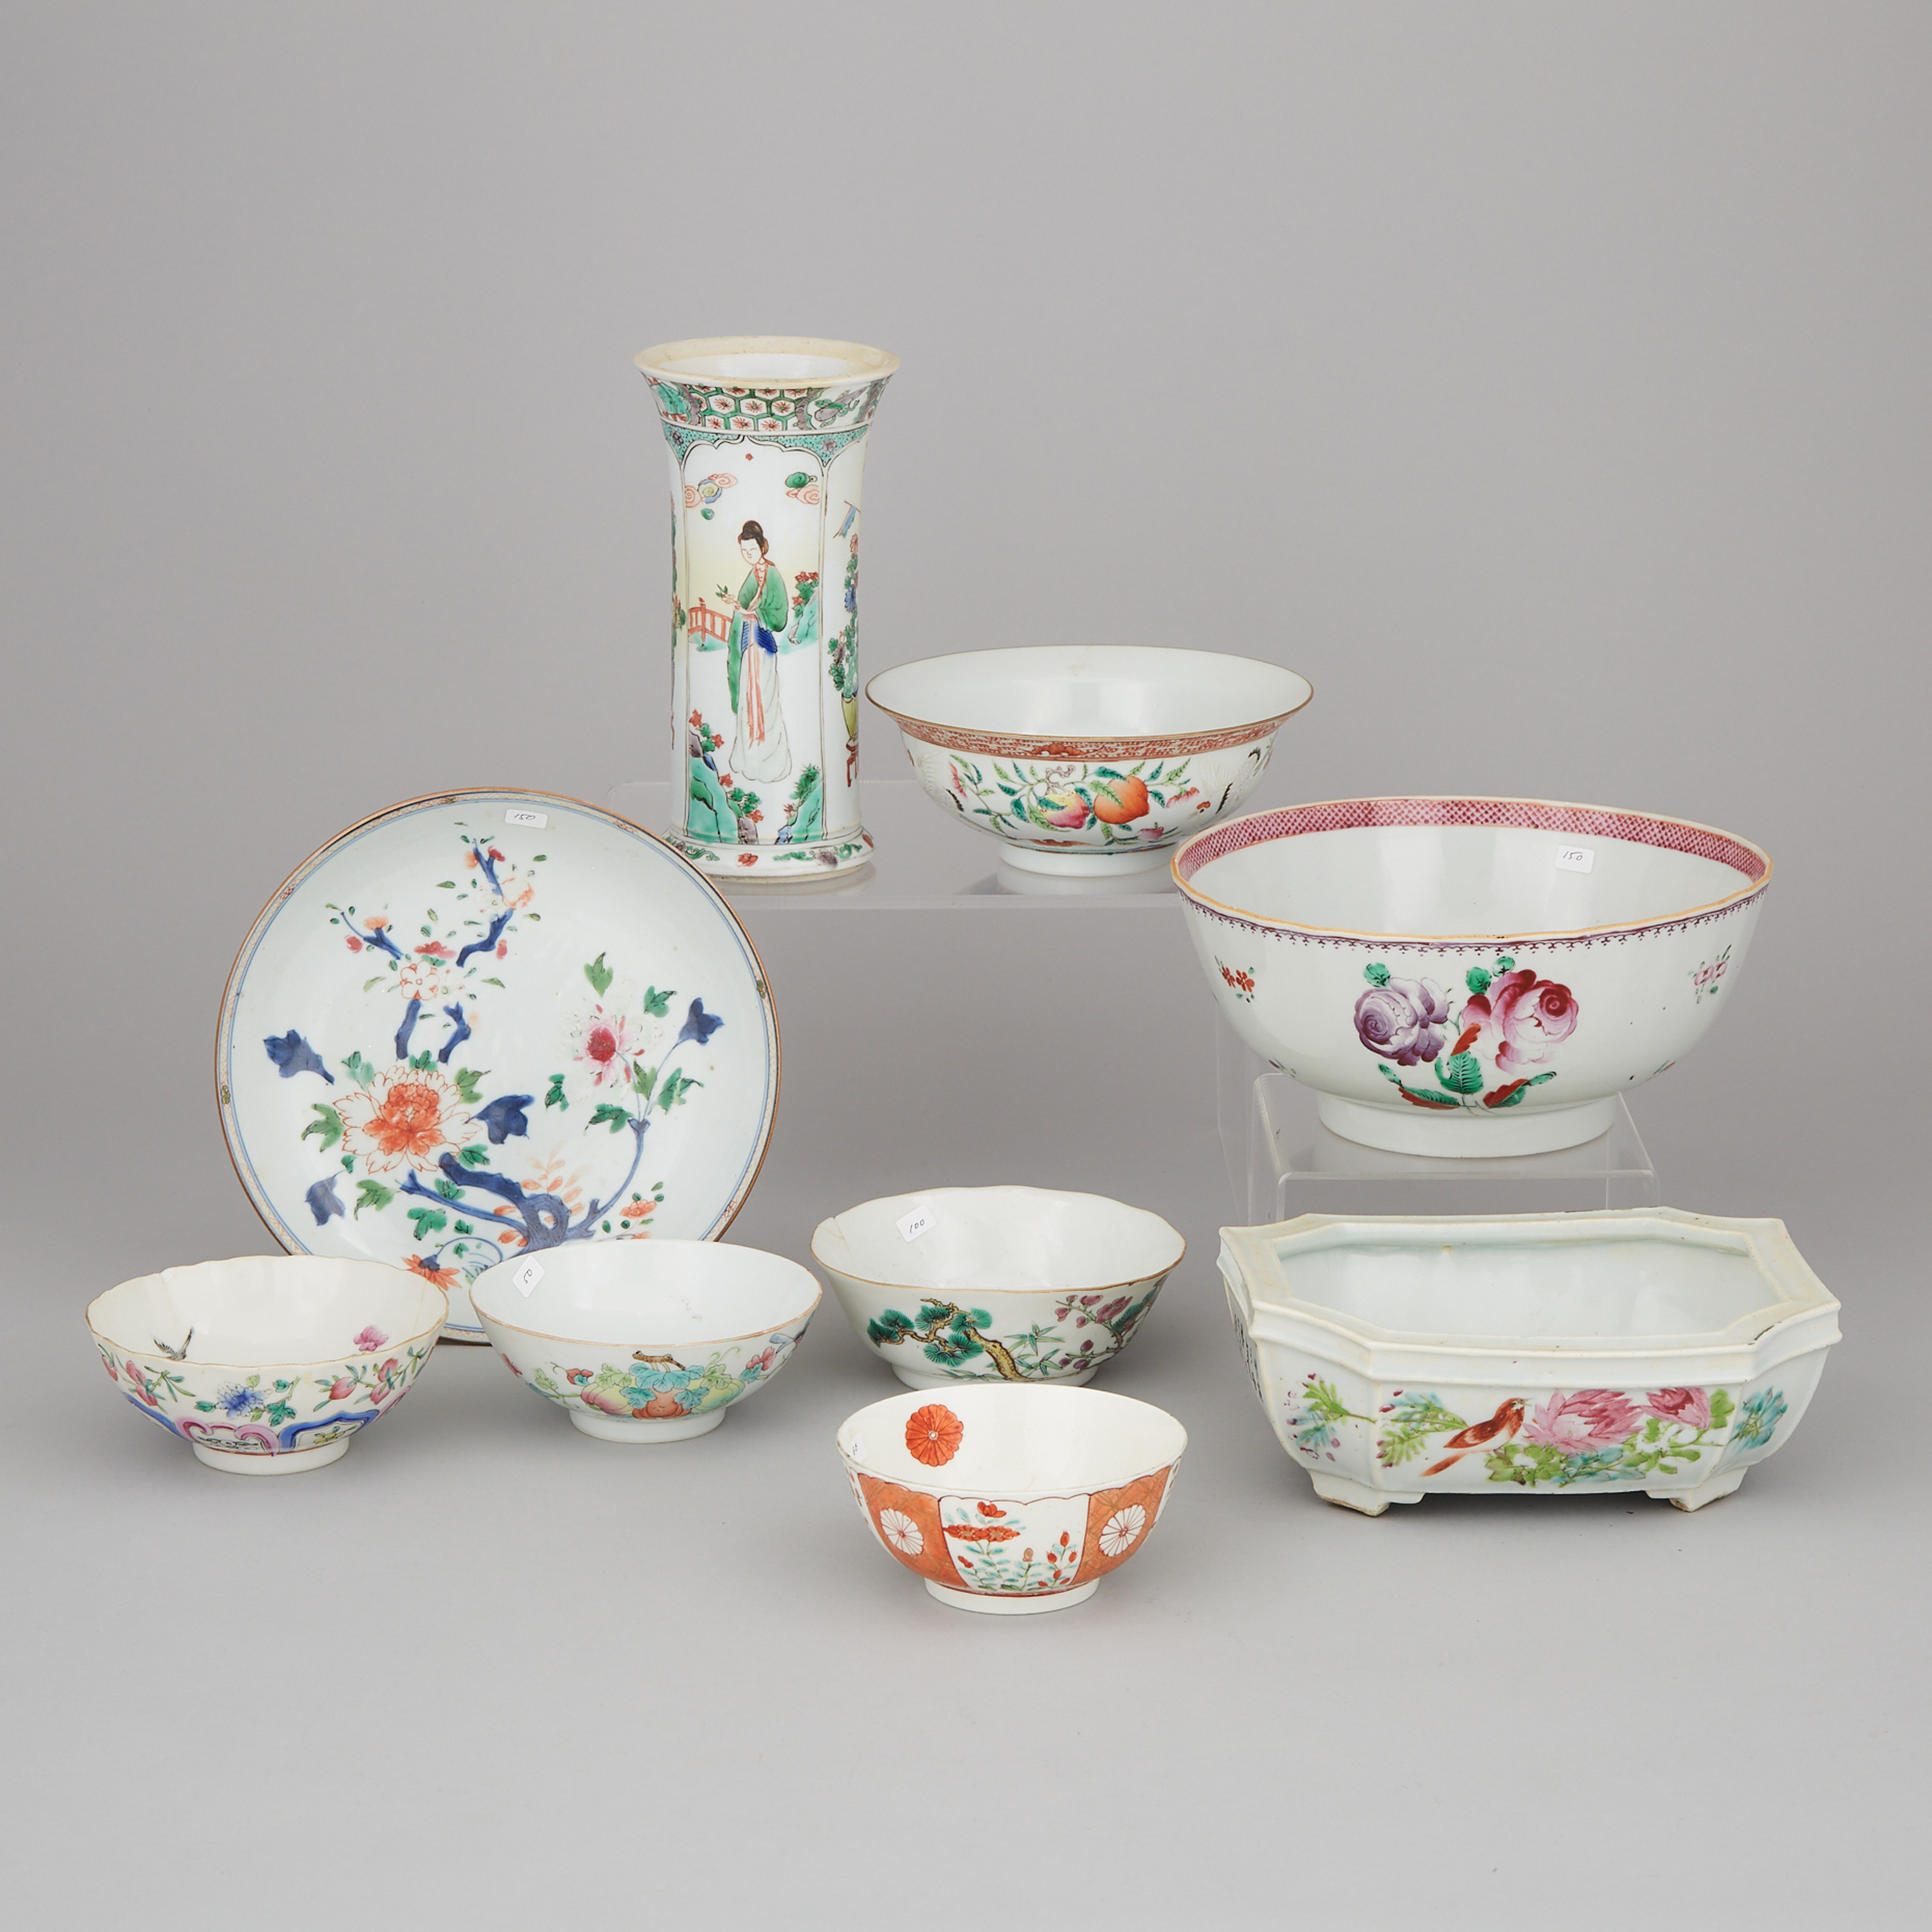 A Group of Nine Famille Rose Wares